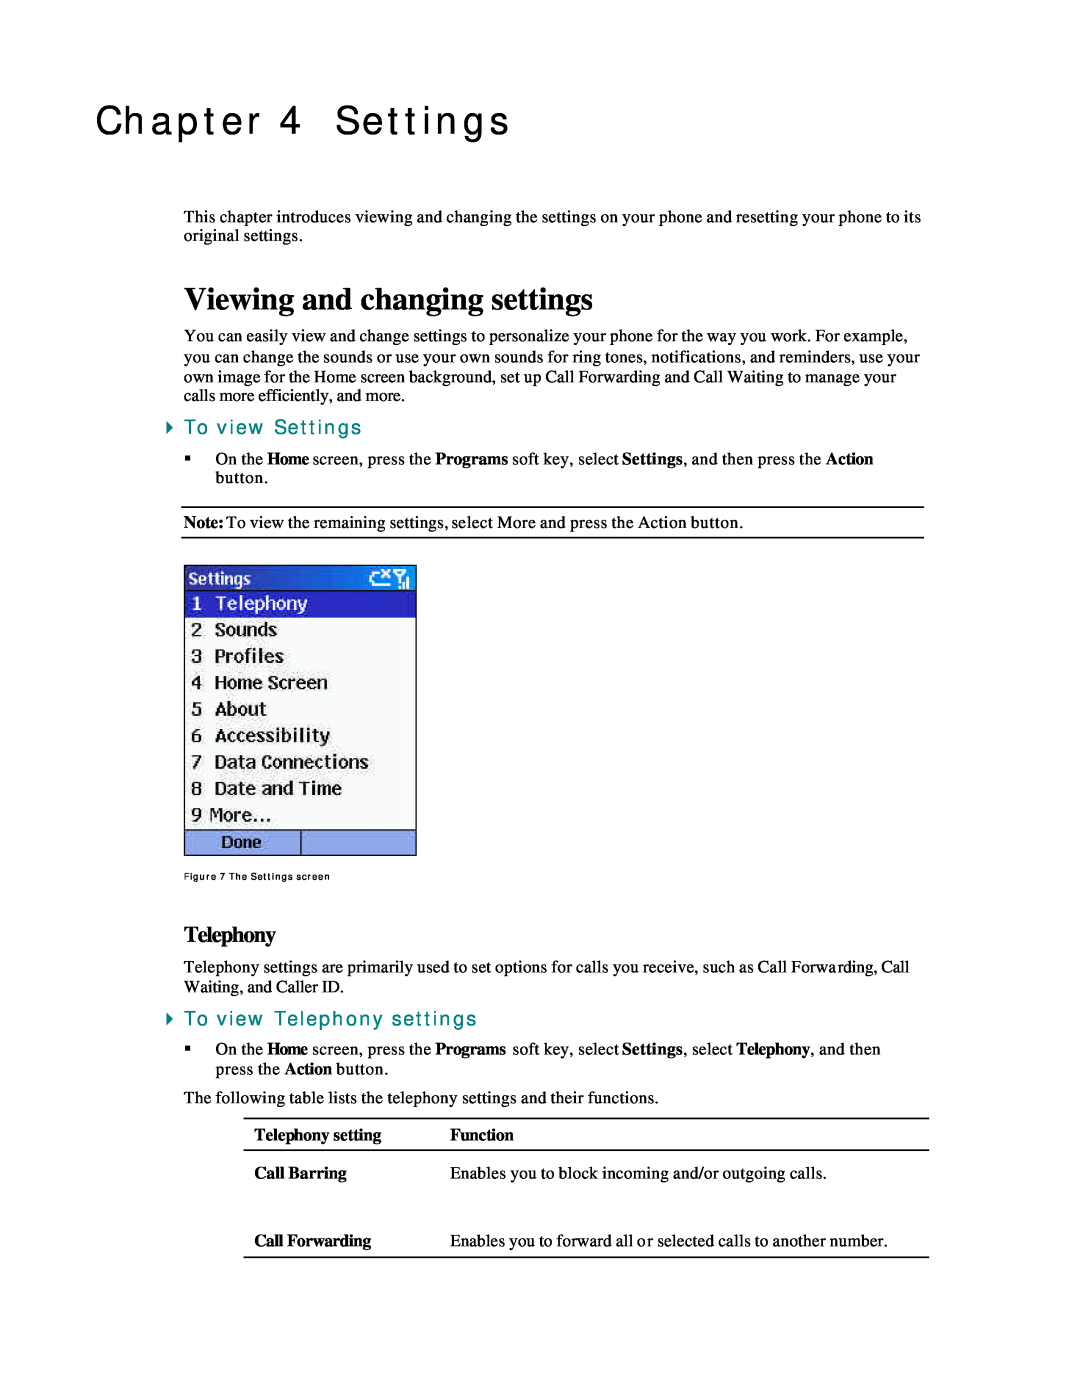 Microsoft Smartphone 2002 Viewing and changing settings, To view Settings, To view Telephony settings, Function 